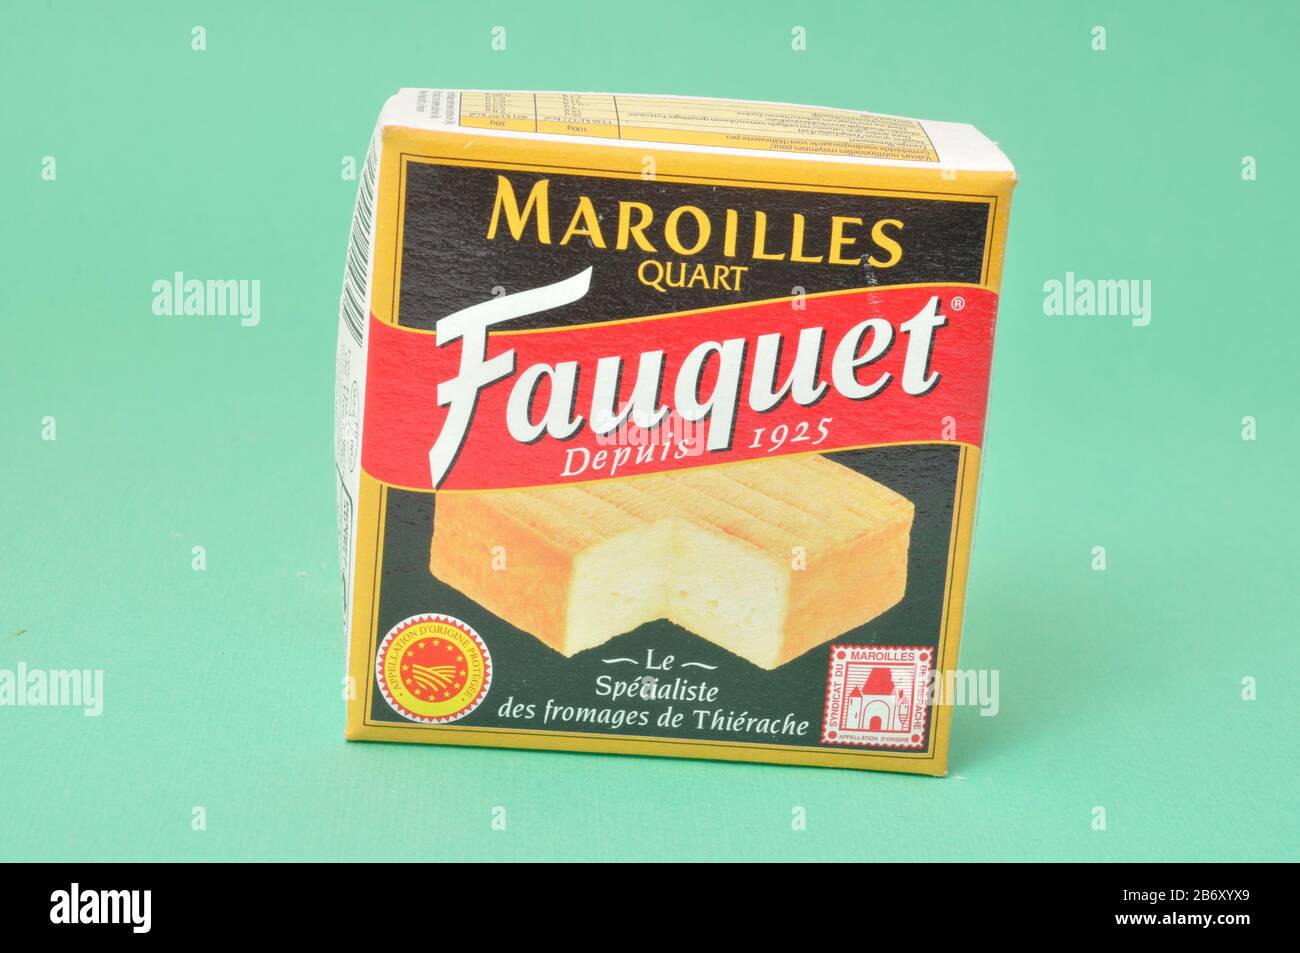 Maroilles, french cheese Stock Photo